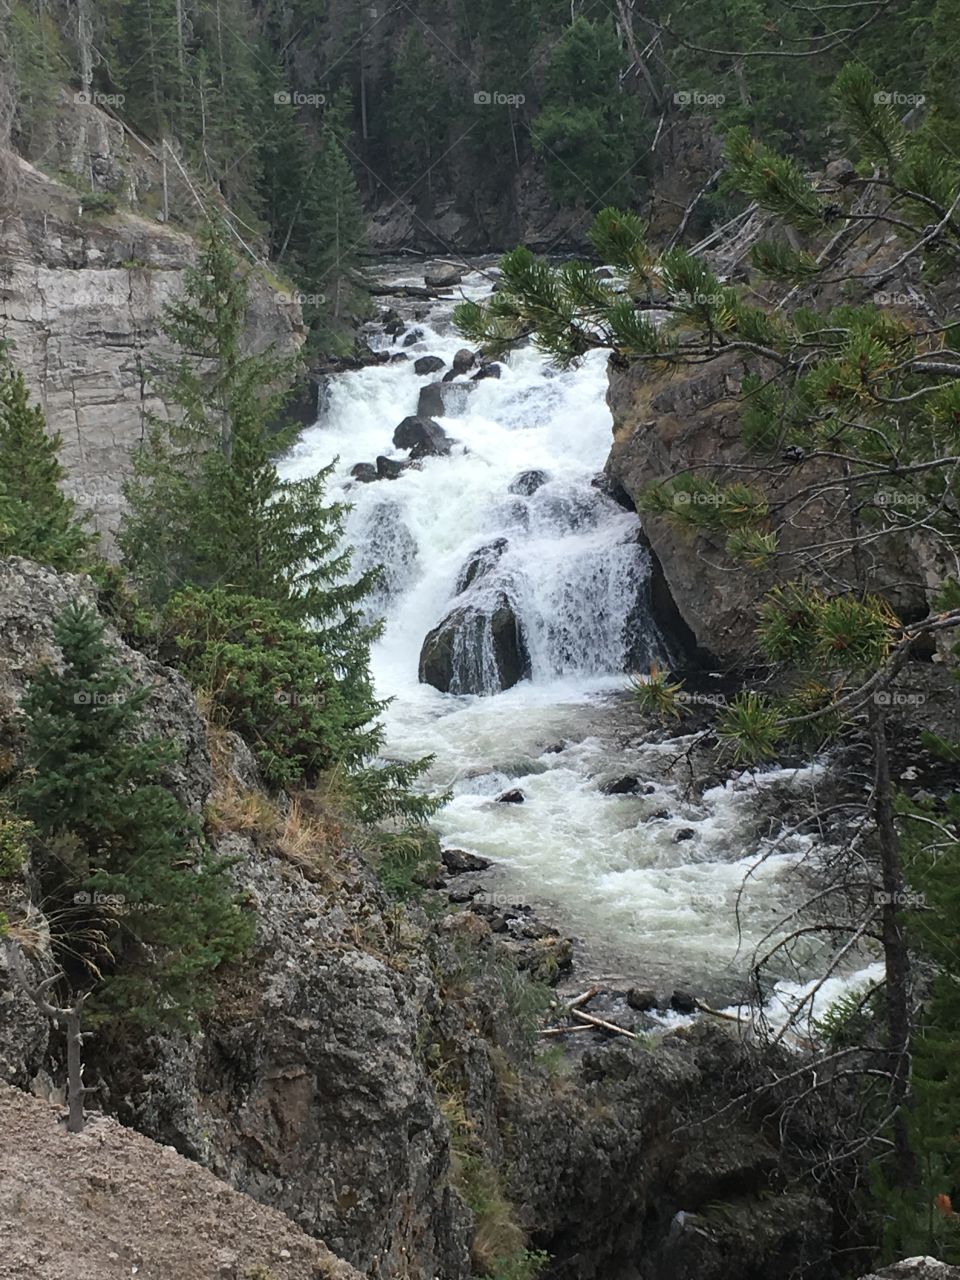 Firehose Falls in Yellowstone. The roar of the water was so amazing! 